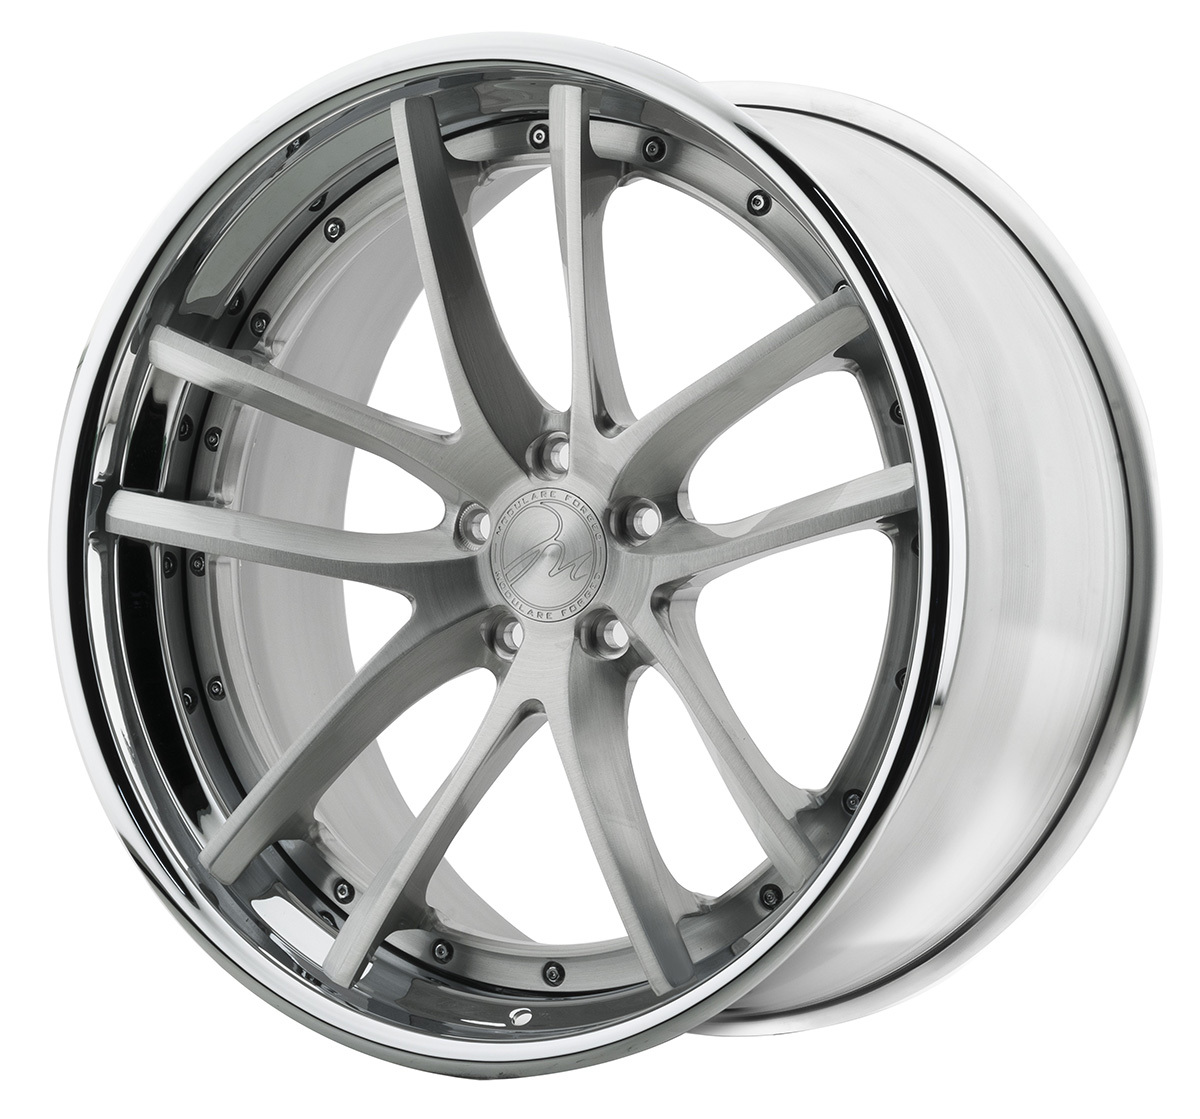 Modulare S30 forged wheels